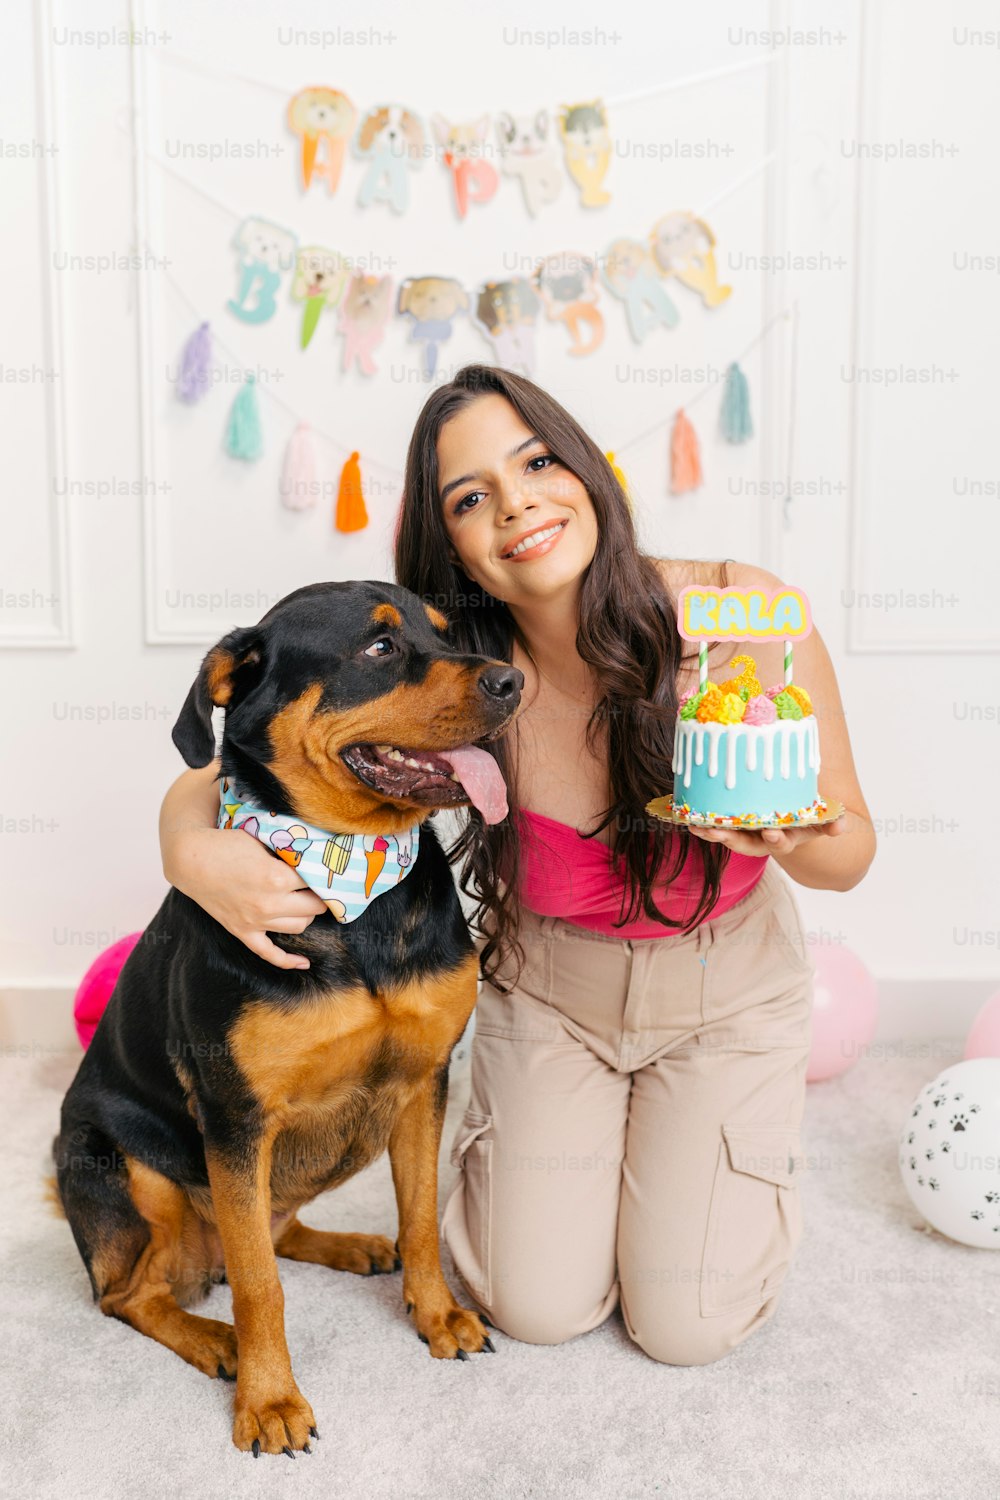 a woman holding a birthday cake next to a dog